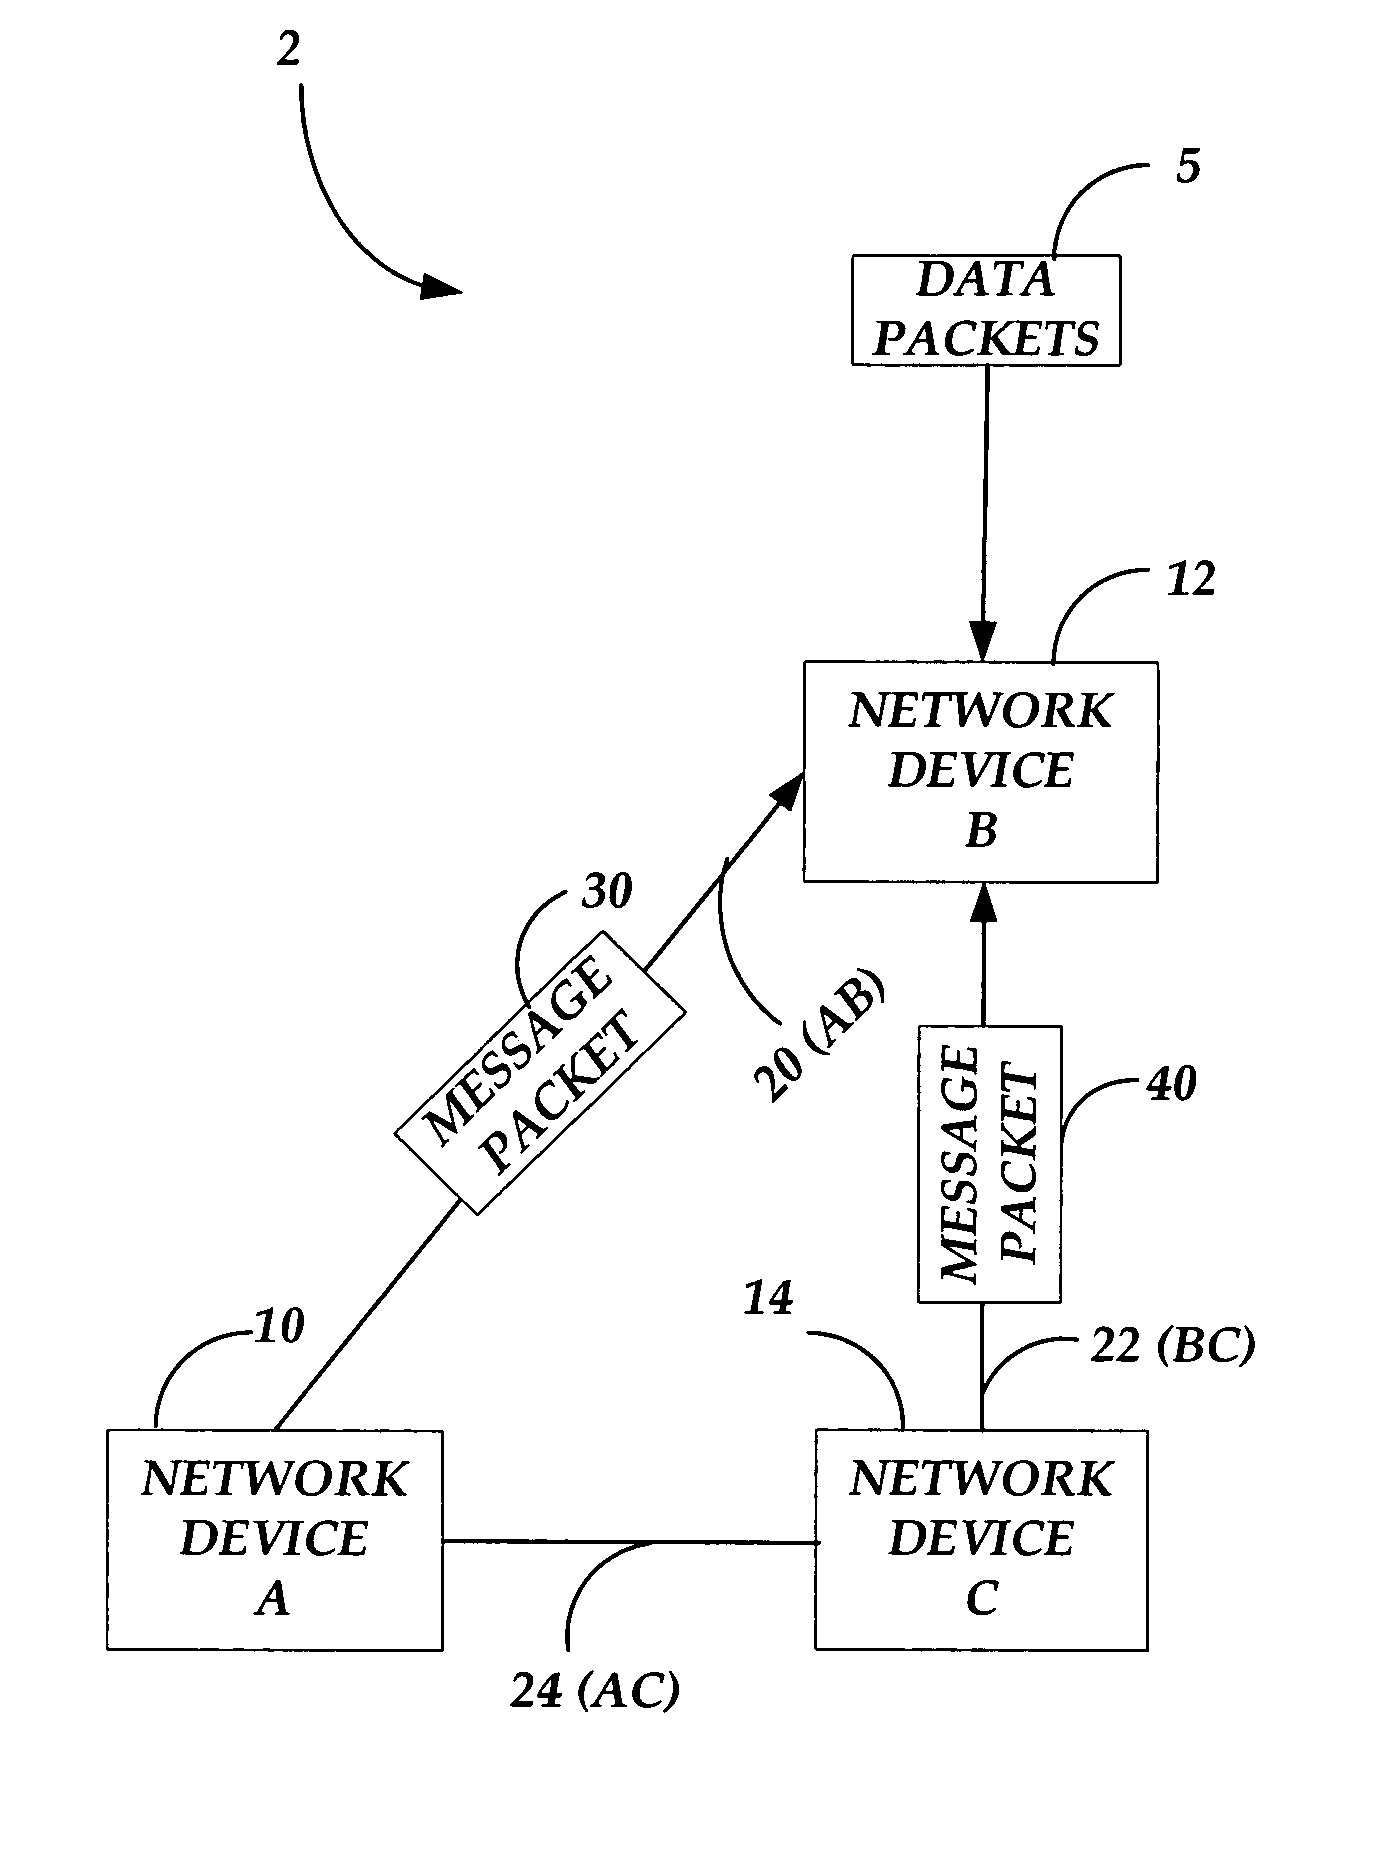 Methods, systems, and computer-readable media for optimizing the communication of data packets in a data network